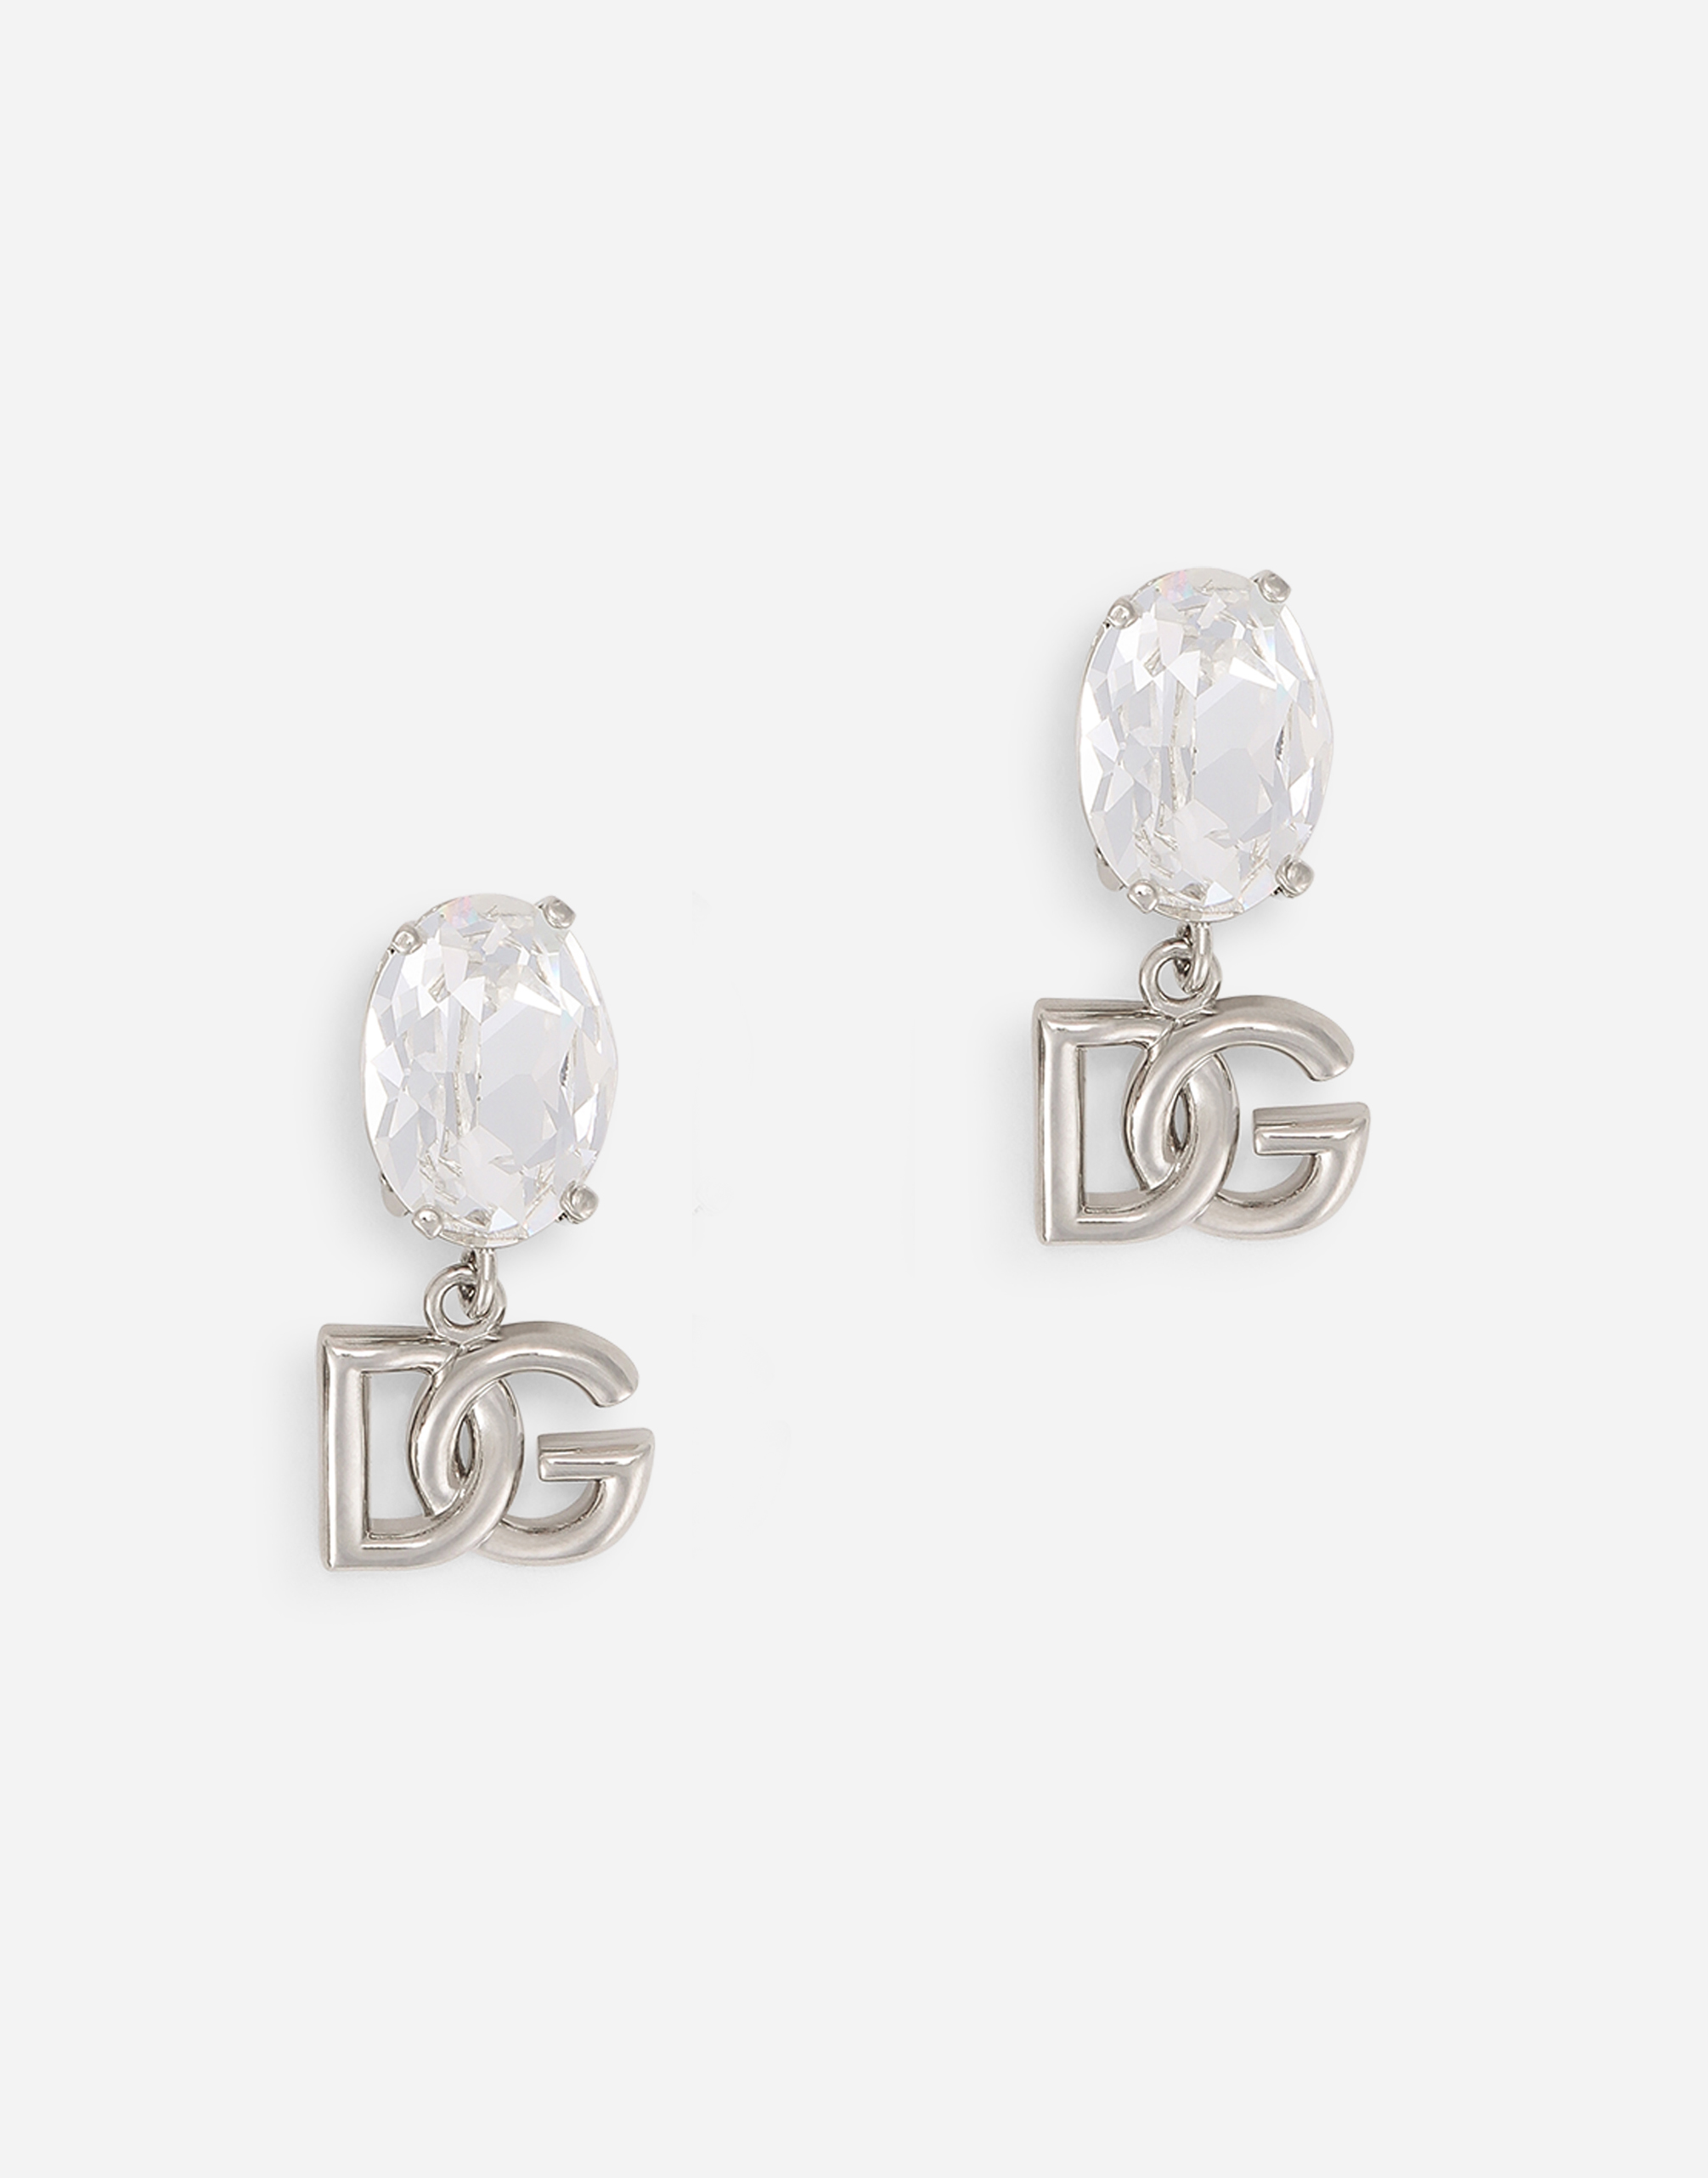 Drop earrings with rhinestones and DG logo in Silver